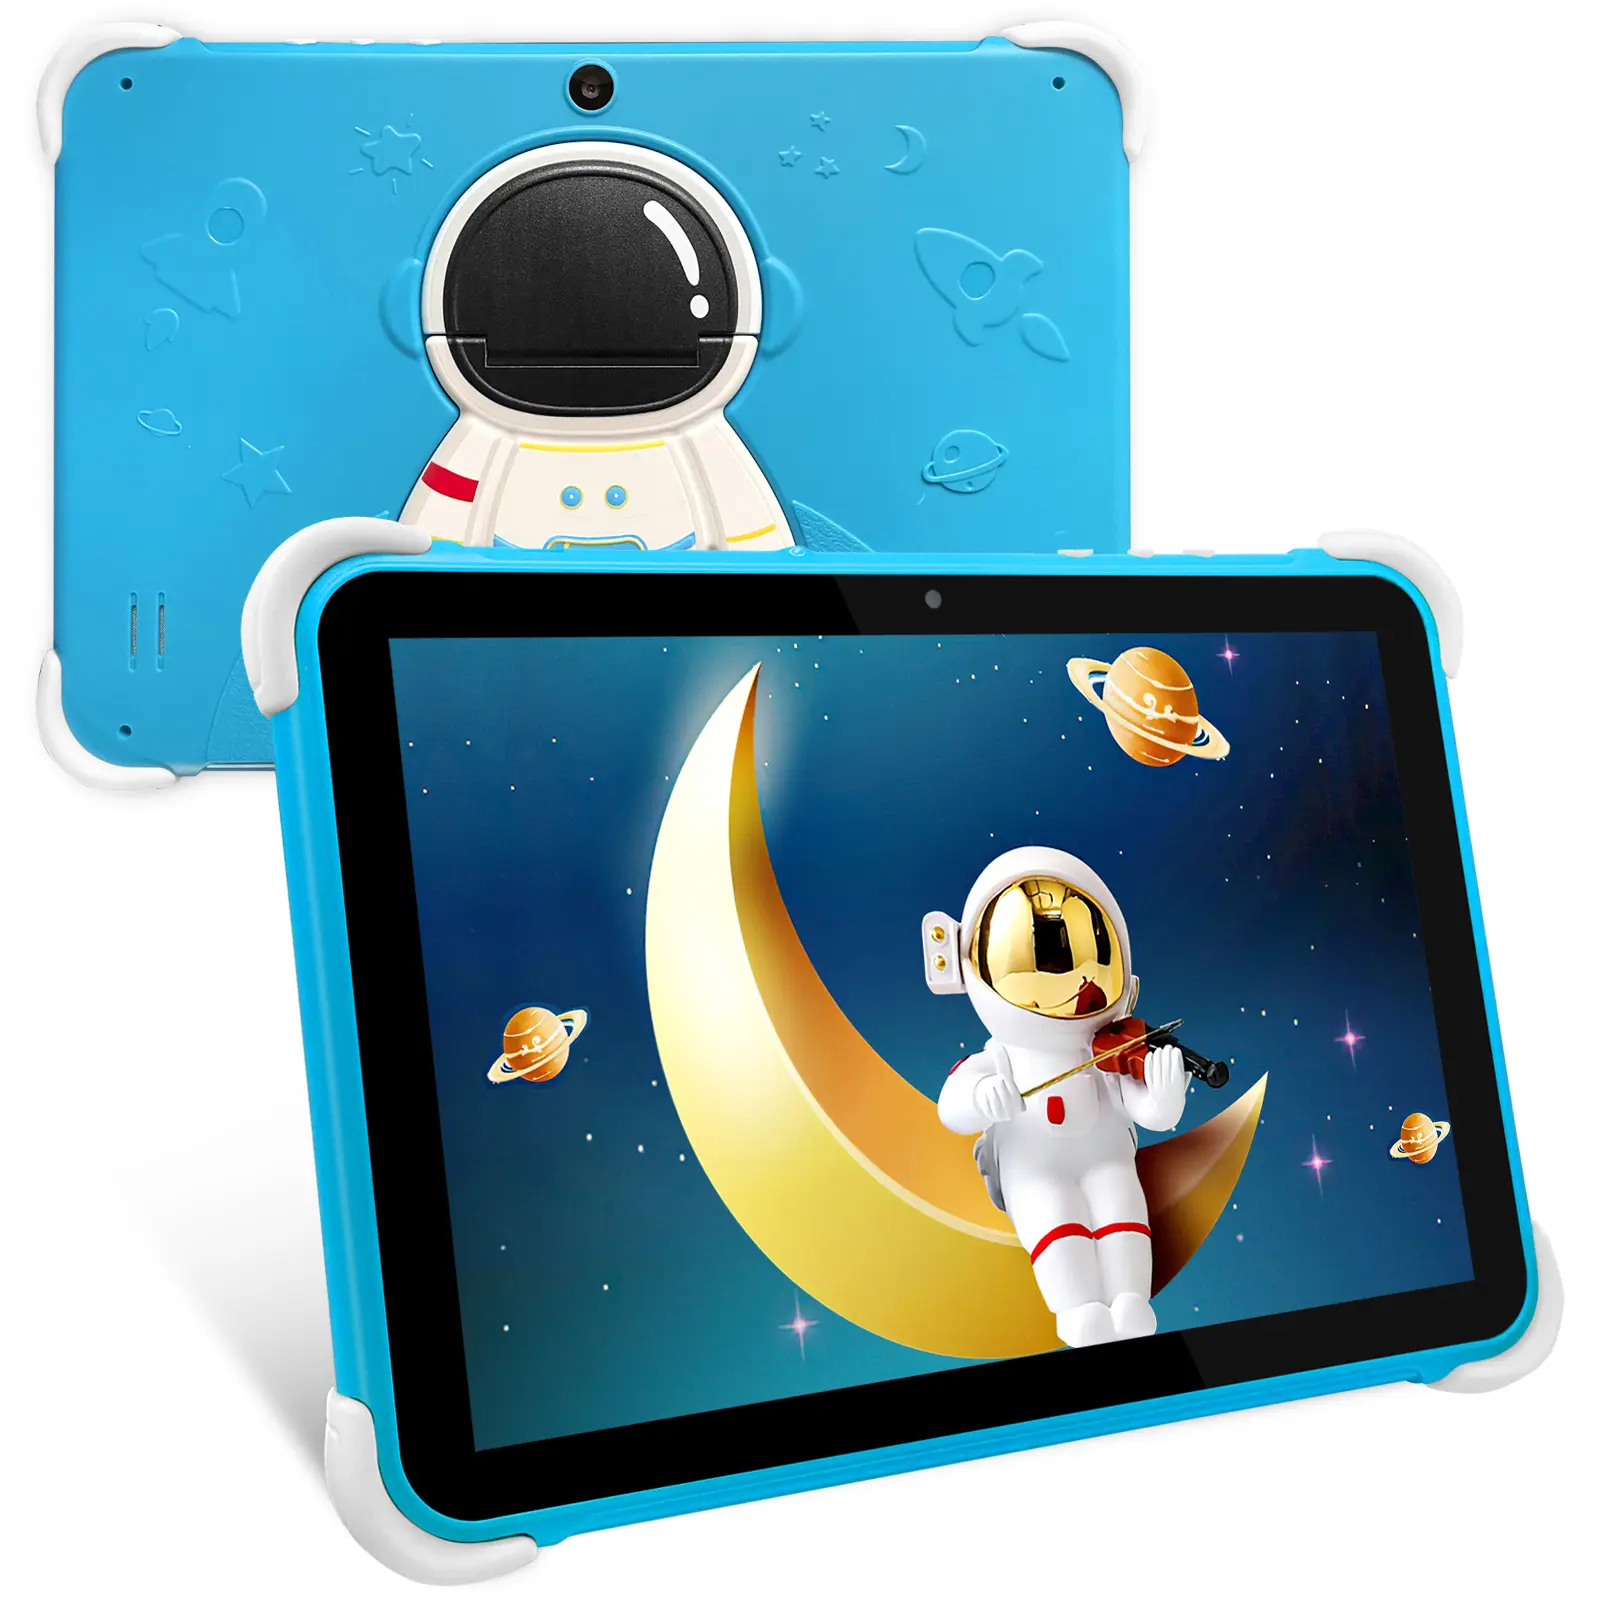 Large stock Manufacturer 10 inch With 64GB Encourage curiosity with a tablet designed for growing young minds Android Tablet PC